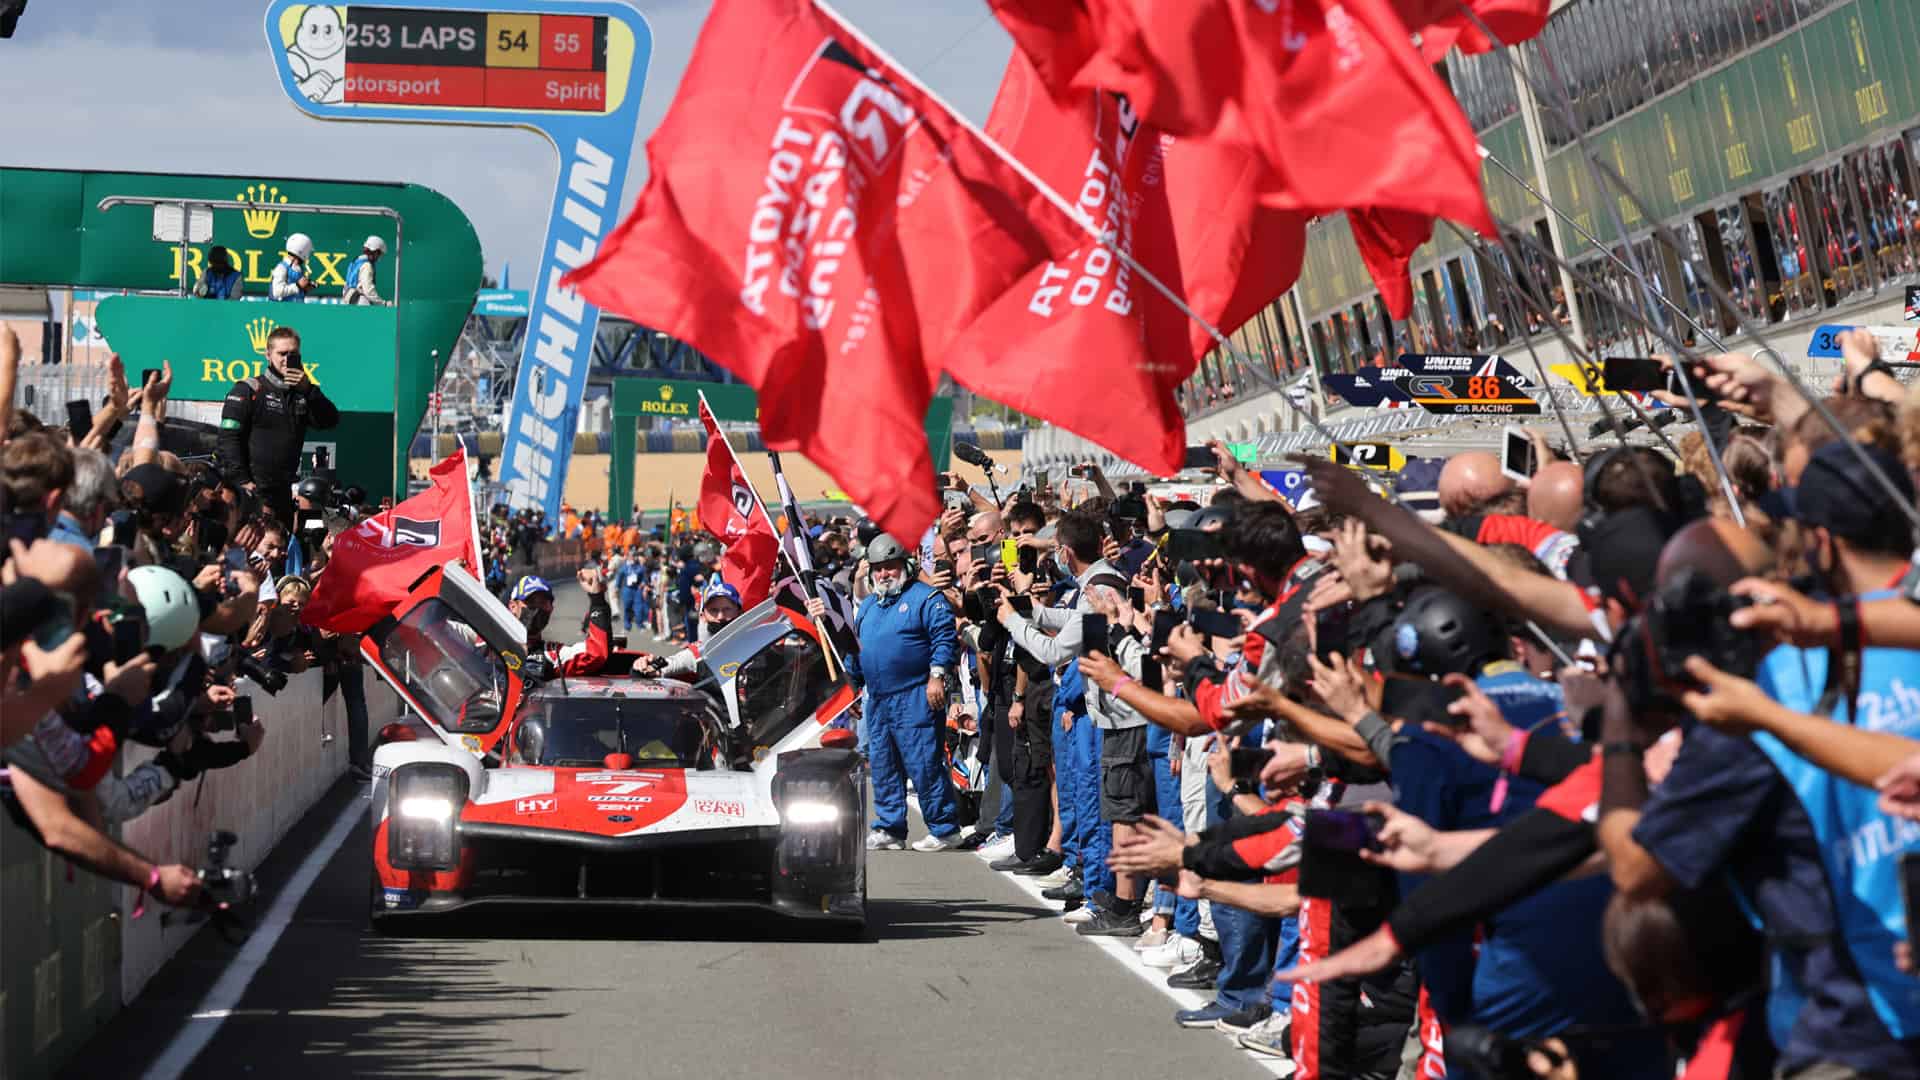 Gran Turismo 7 will soon receive Toyota's dominant GR010 Hybrid Le Mans car